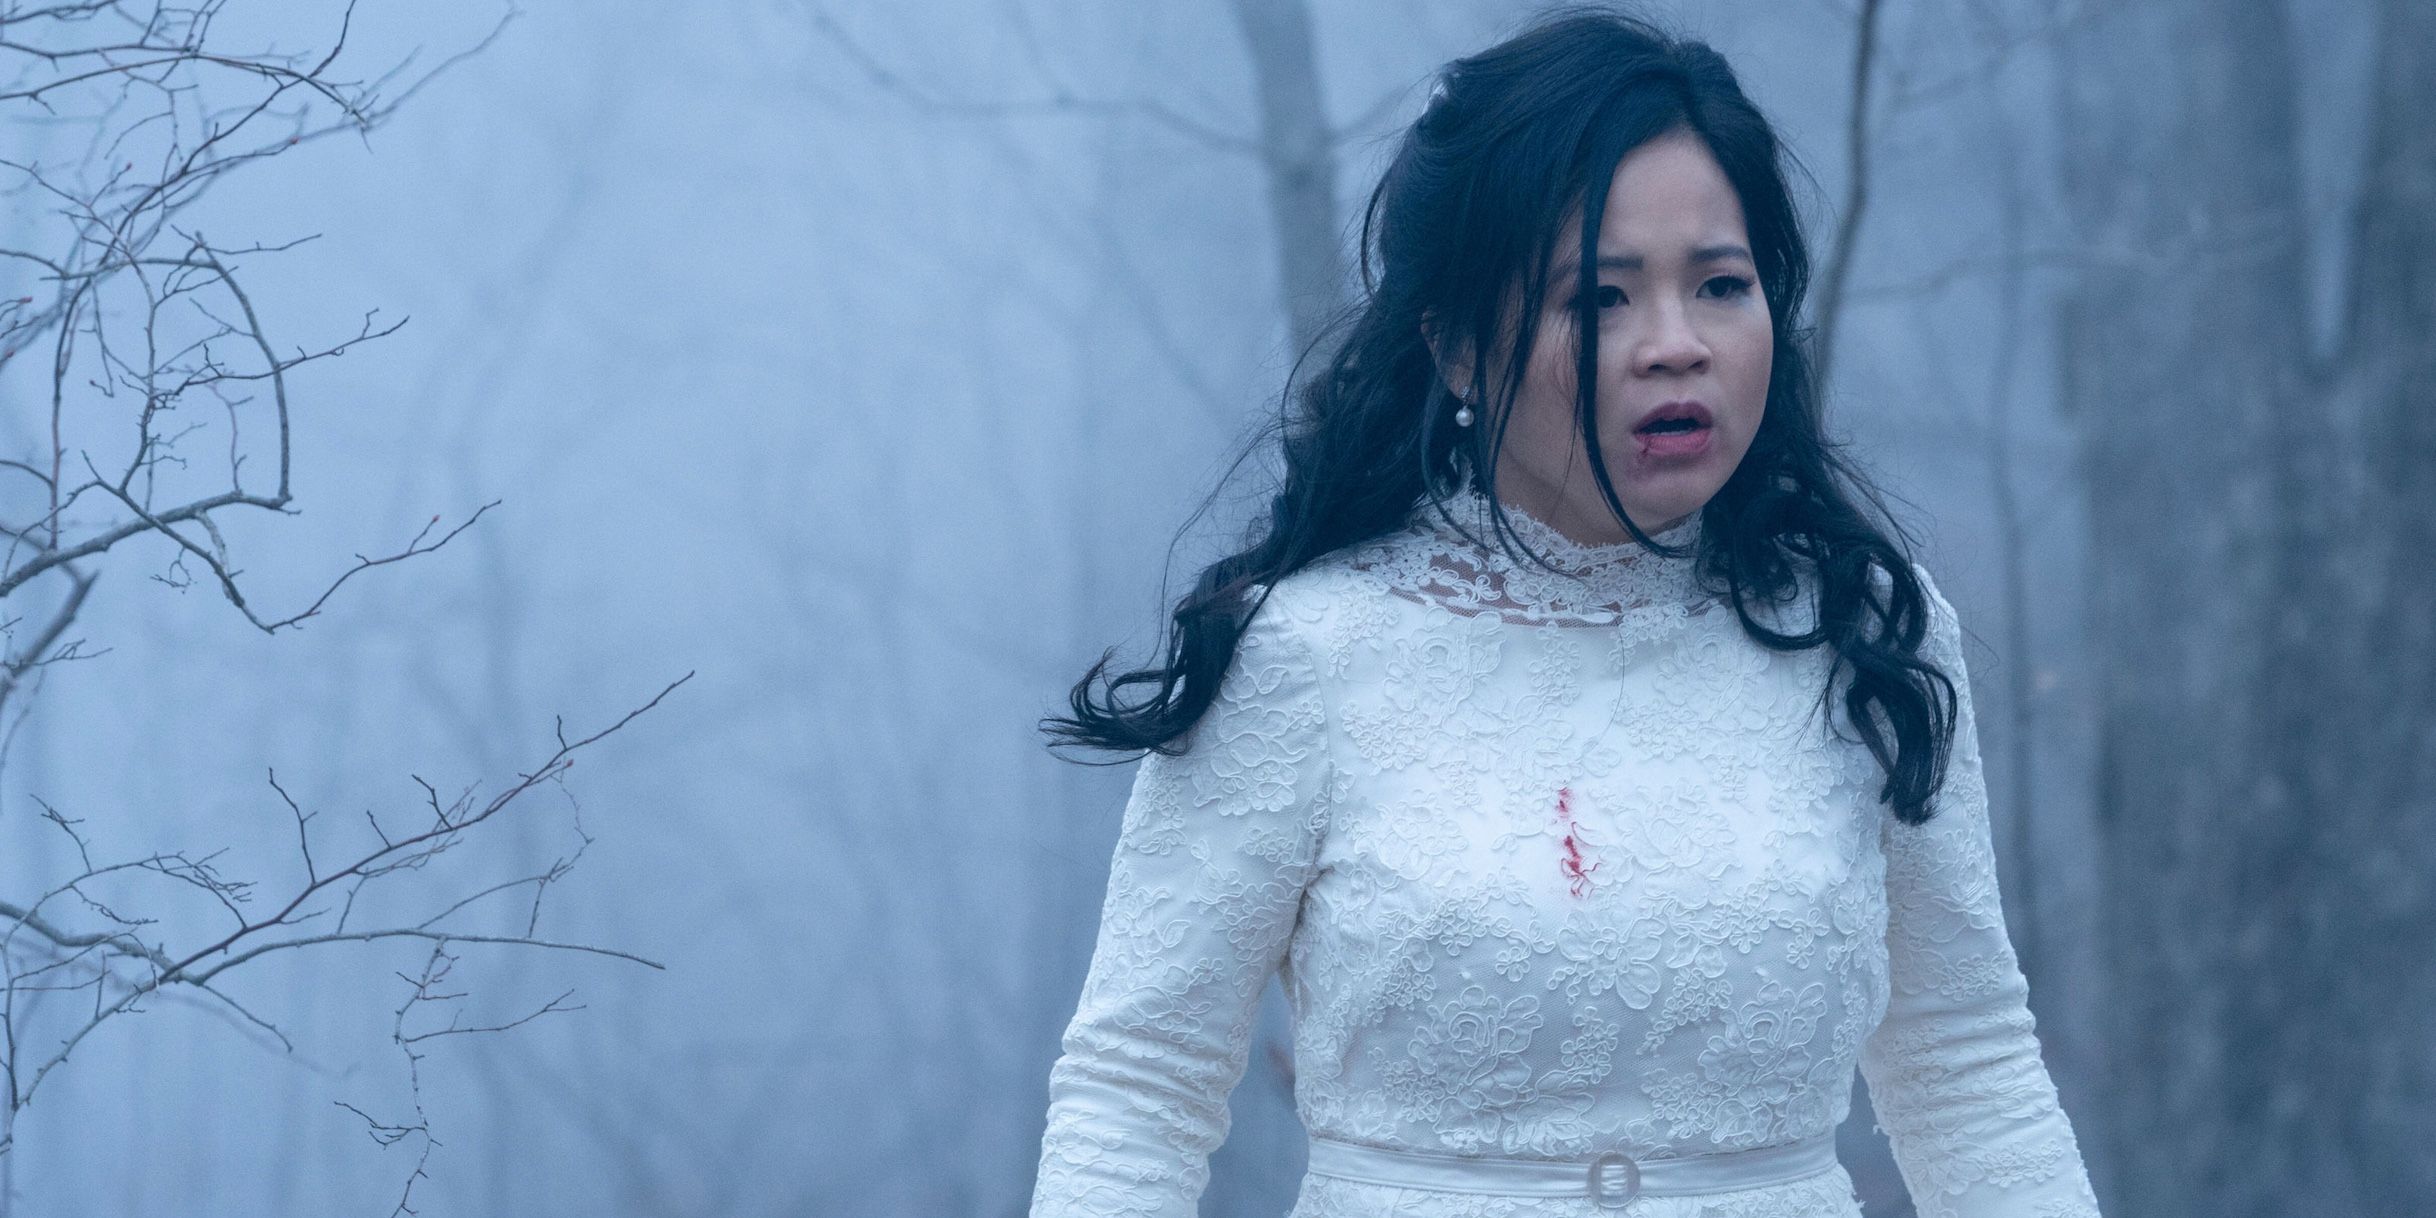 Kelly Marie Tran wanders the woods in a bloodied wedding dress in Monsterland